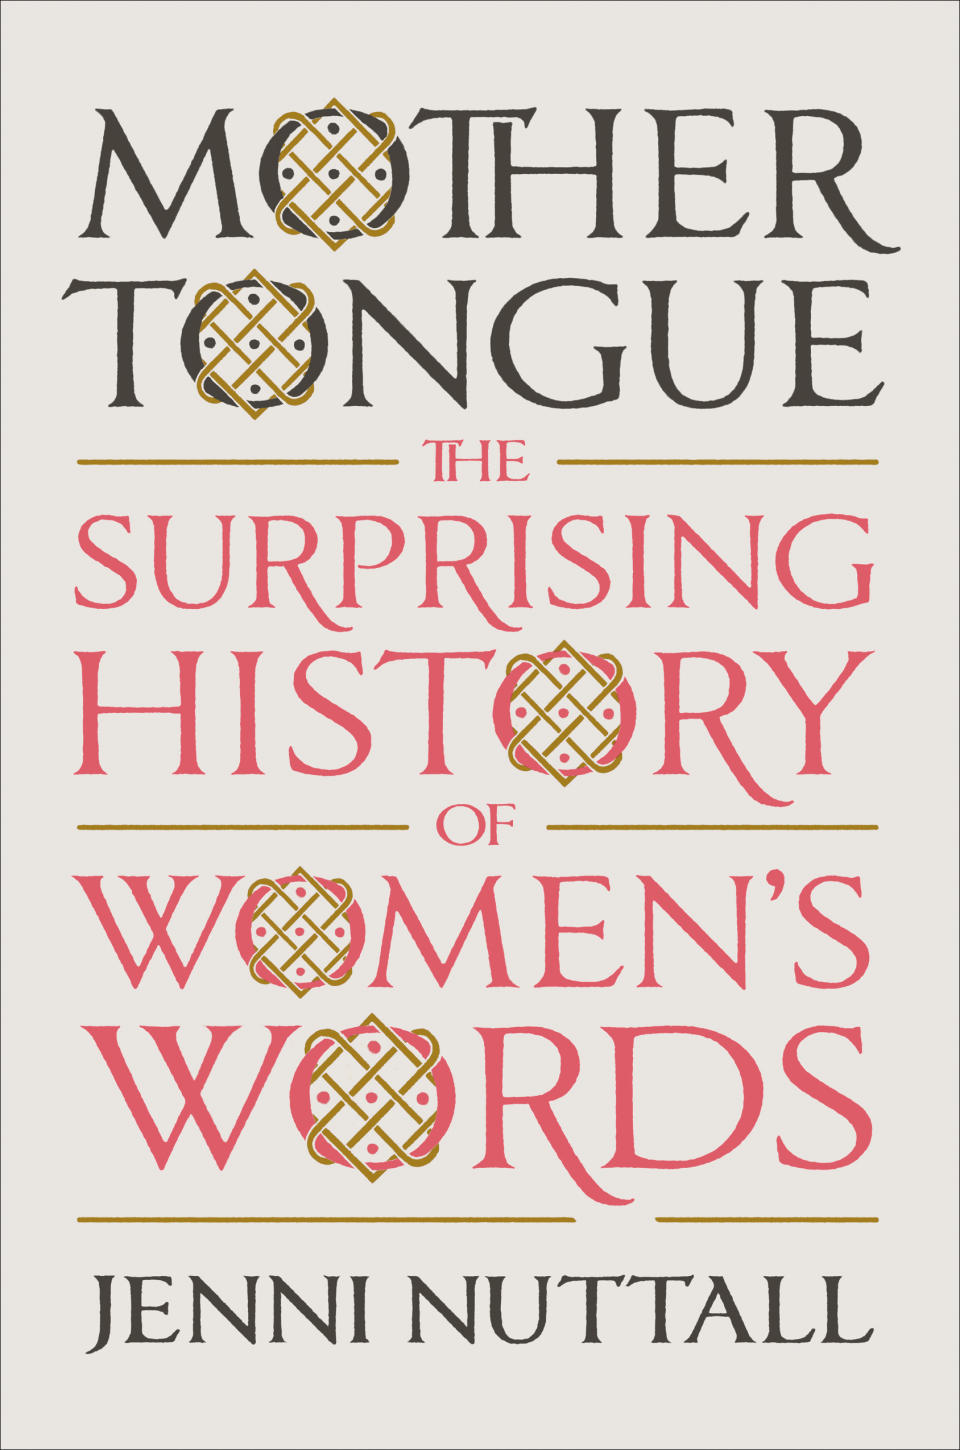 This cover image released by Viking shows “Mother Tongue: The Surprising History of Women's Words,” by Jenni Nuttall. (Viking via AP)